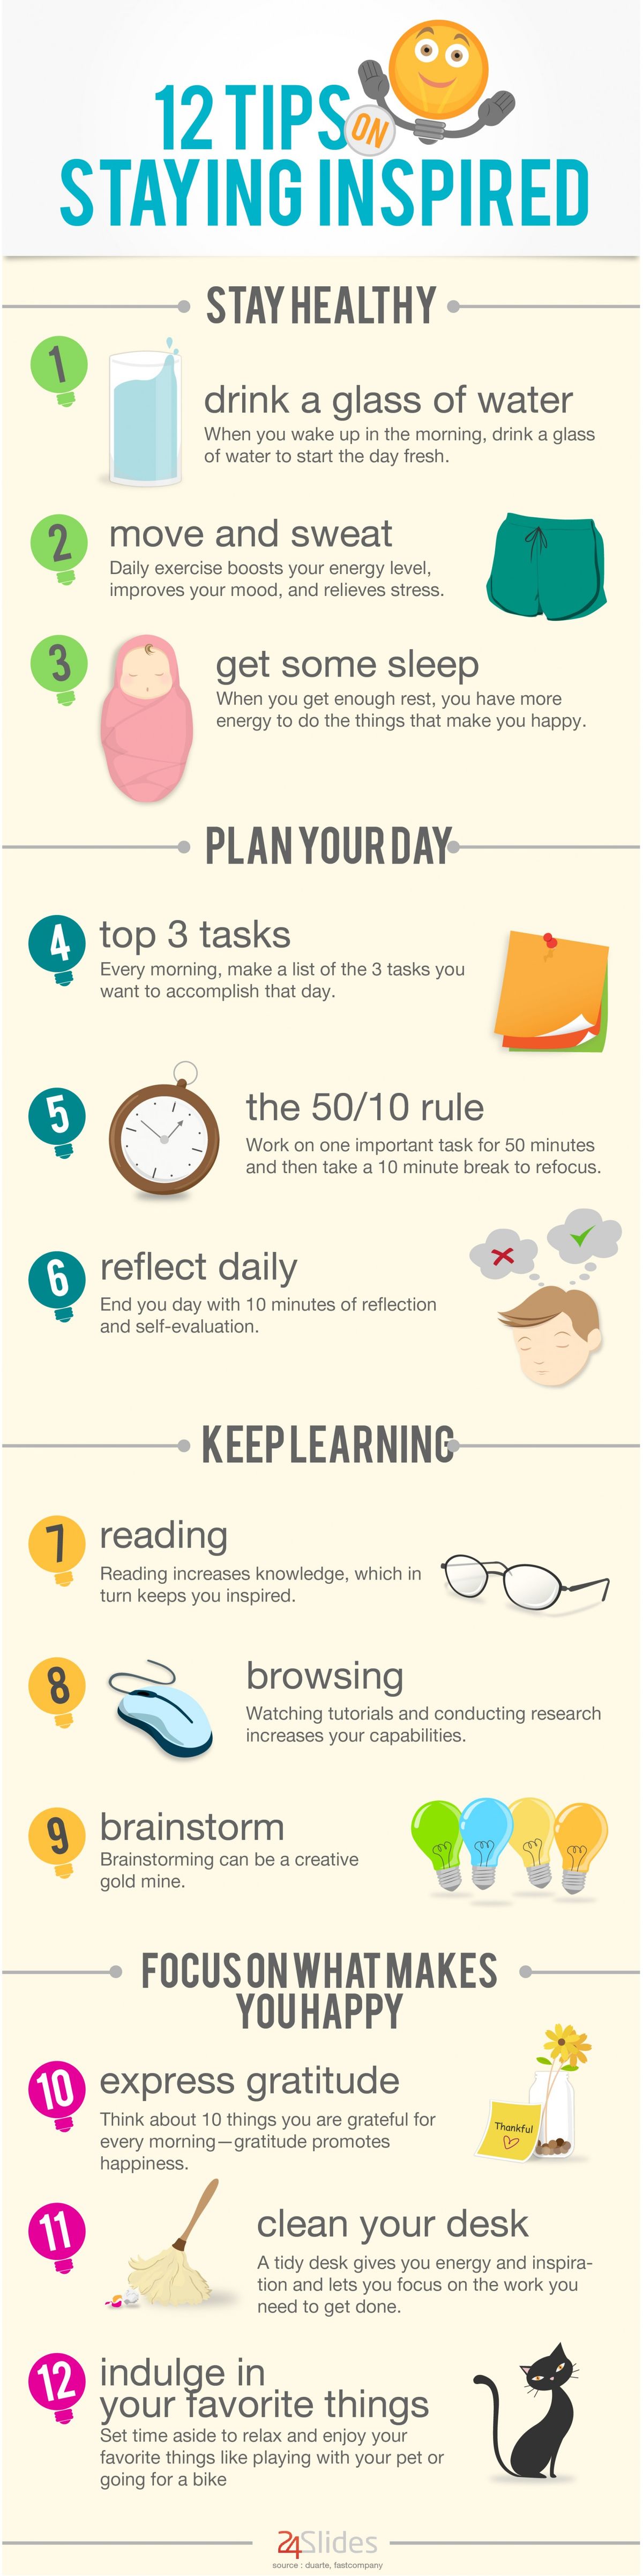 12 Tips on Staying Inspired [Infographic]